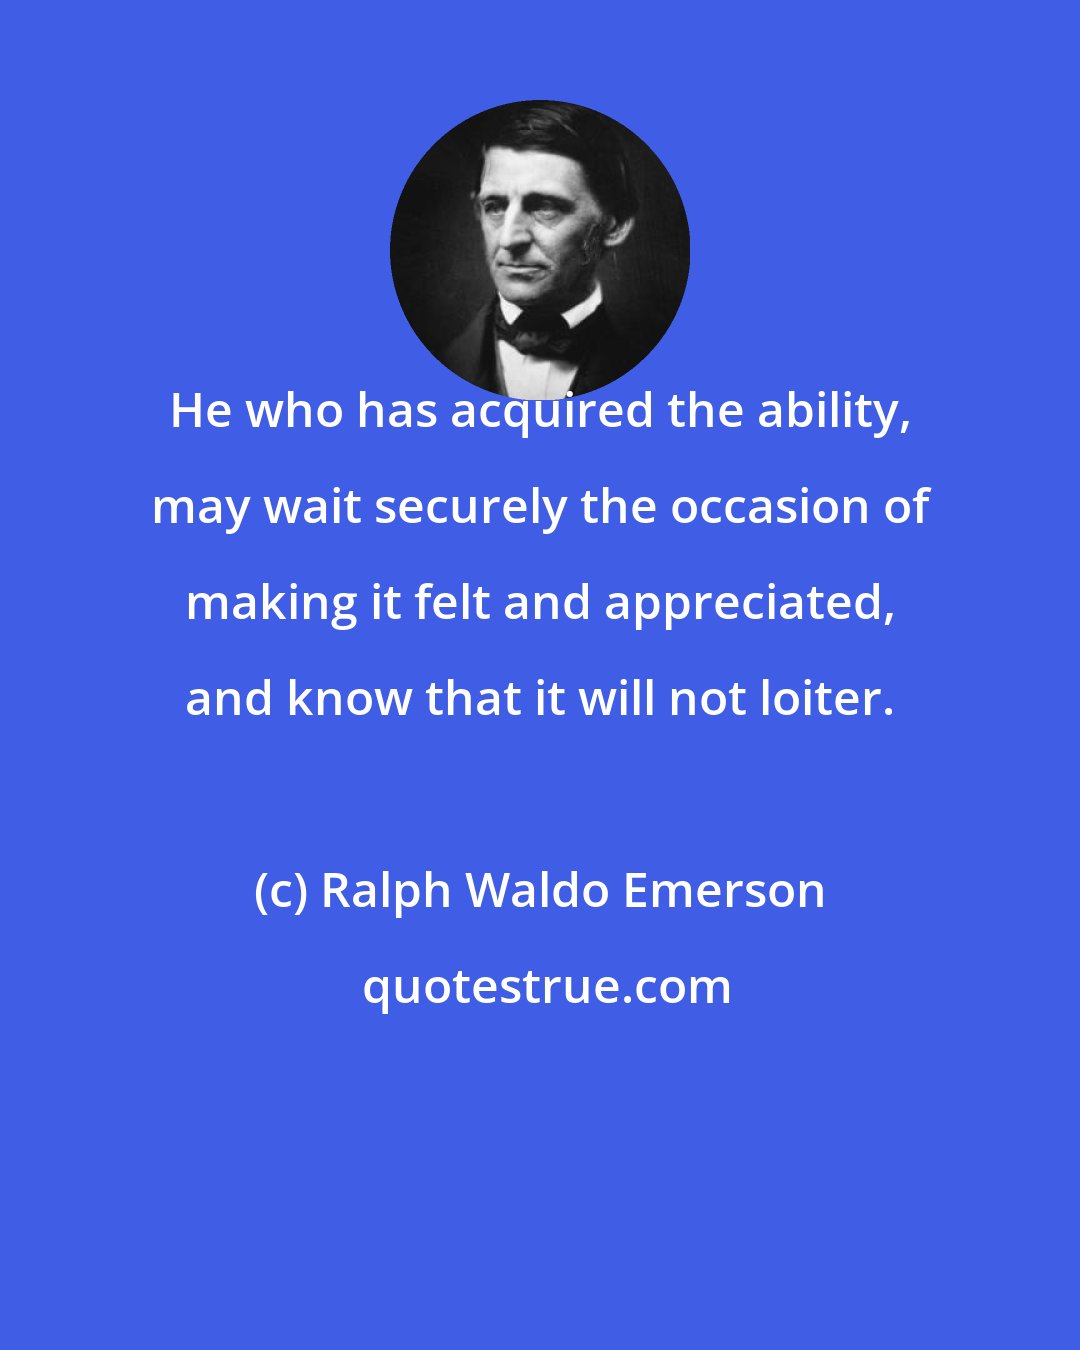 Ralph Waldo Emerson: He who has acquired the ability, may wait securely the occasion of making it felt and appreciated, and know that it will not loiter.